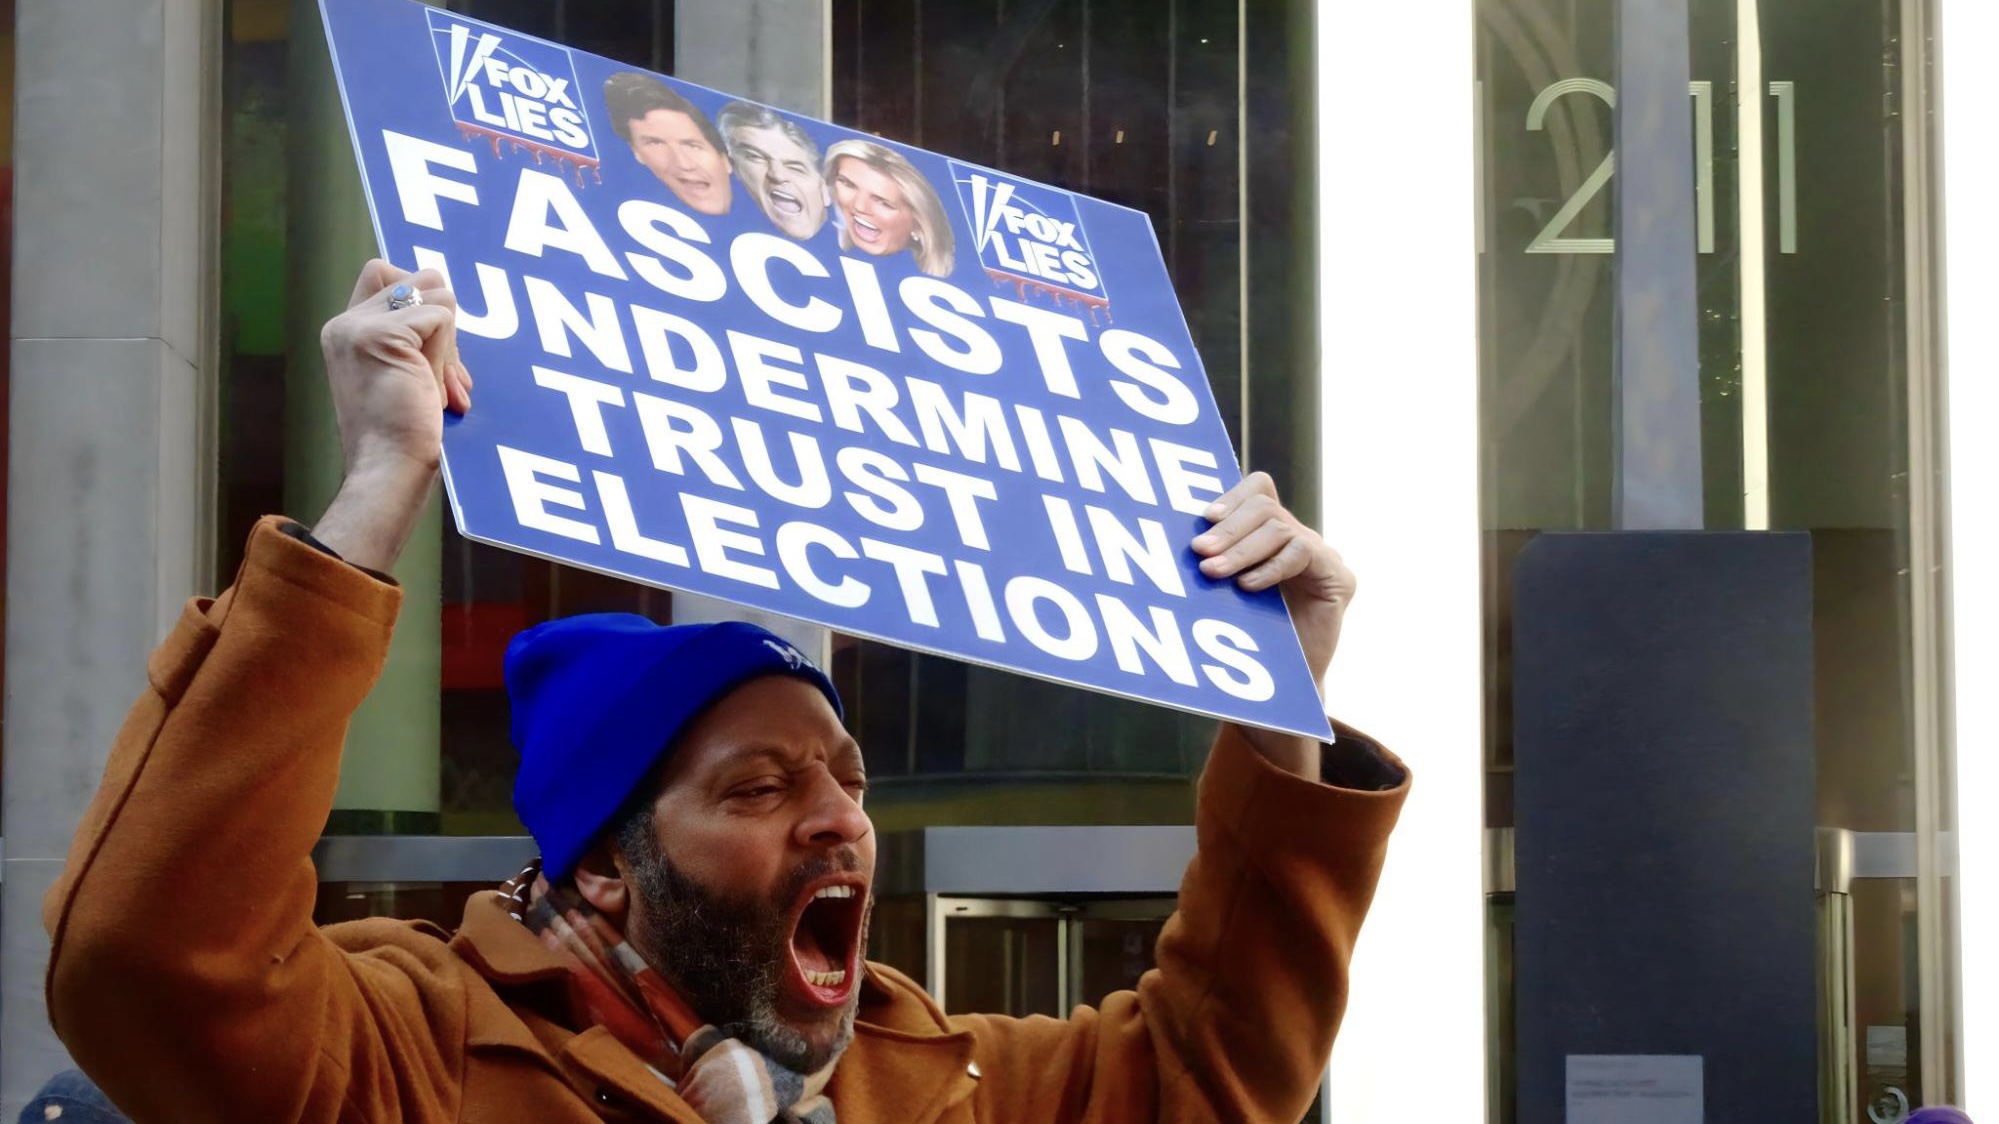 A man wearing a blue hat, flannel scarf, and brown jacket screams out in protest., He holds a blue sign with the faces of Tucker Carlson, Sean Hannity, and Laura Ingraham that reads in white letters, “FASCISTS UNDERMINE TRUST IN ELECTIONS” LYING NORMAL.”